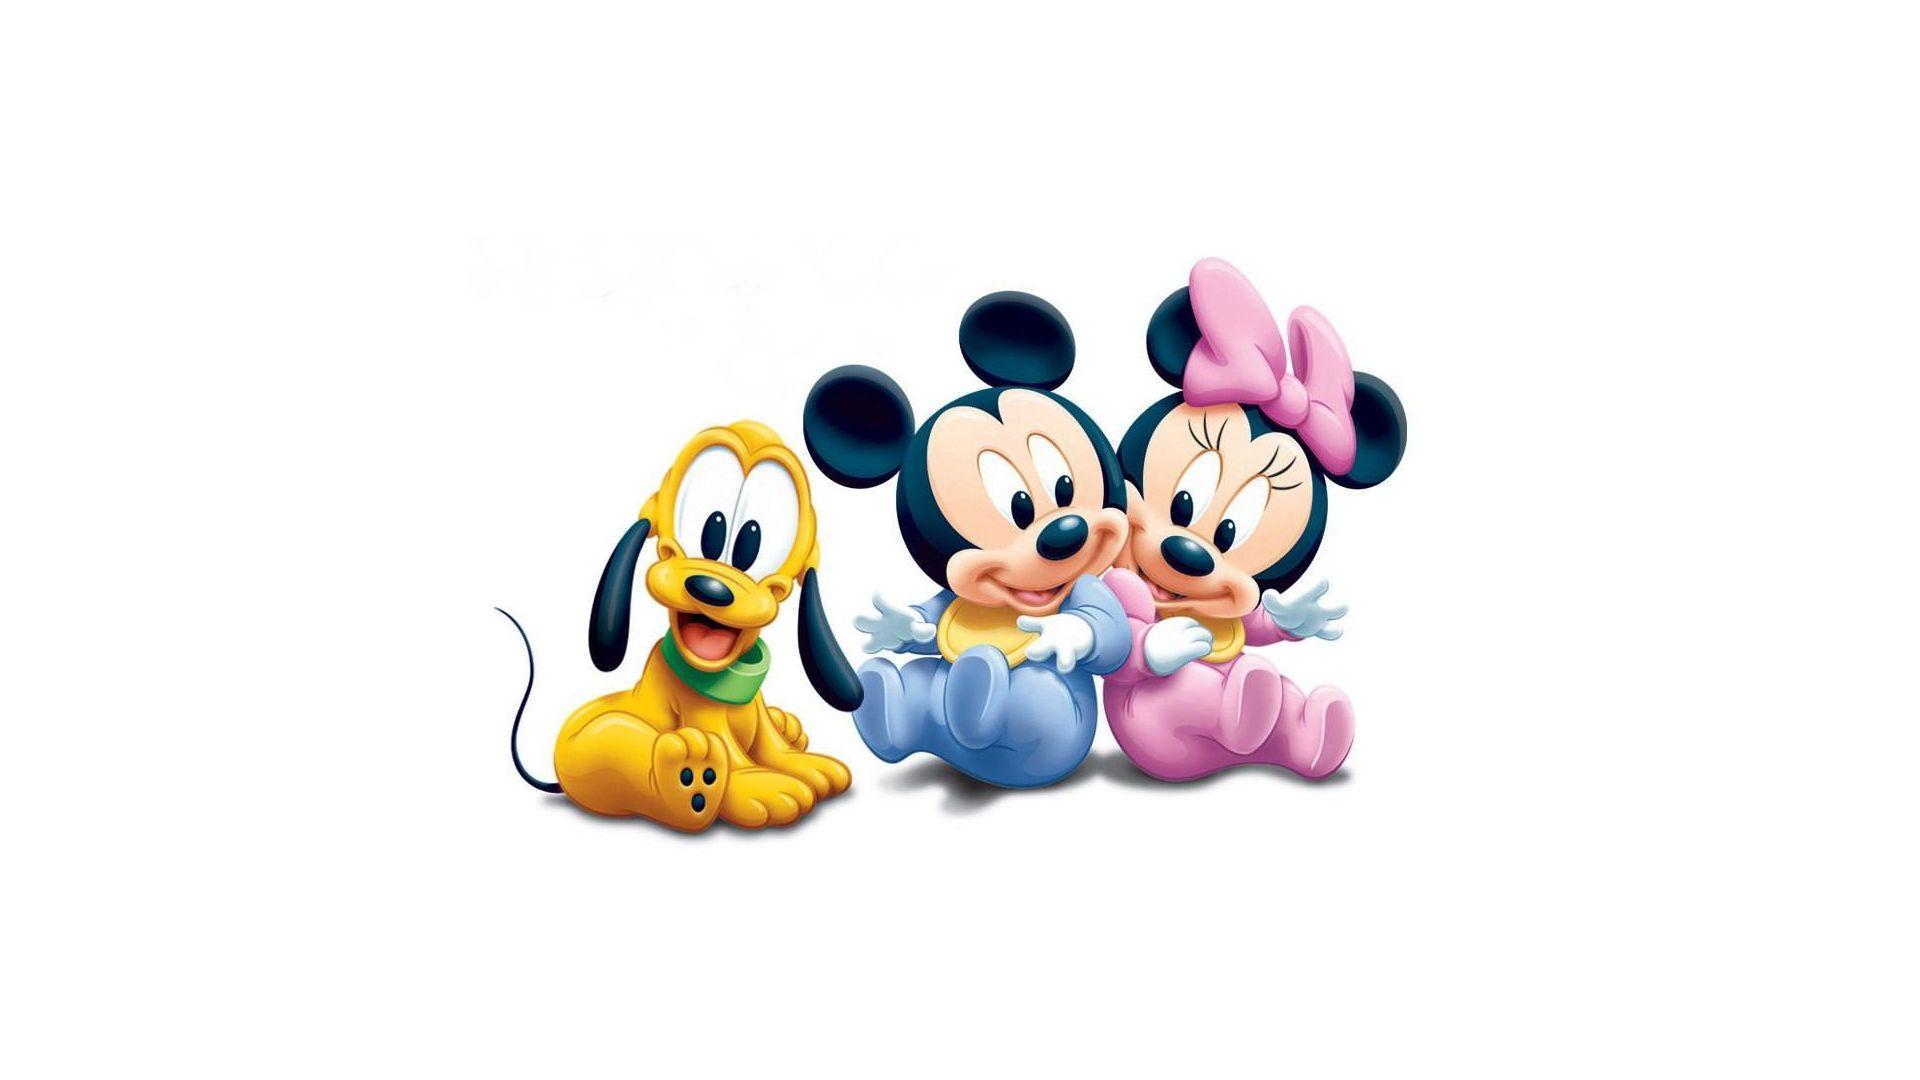 Disney Cartoon Baby Mickey And Minnie Mouse Wallpaper HD